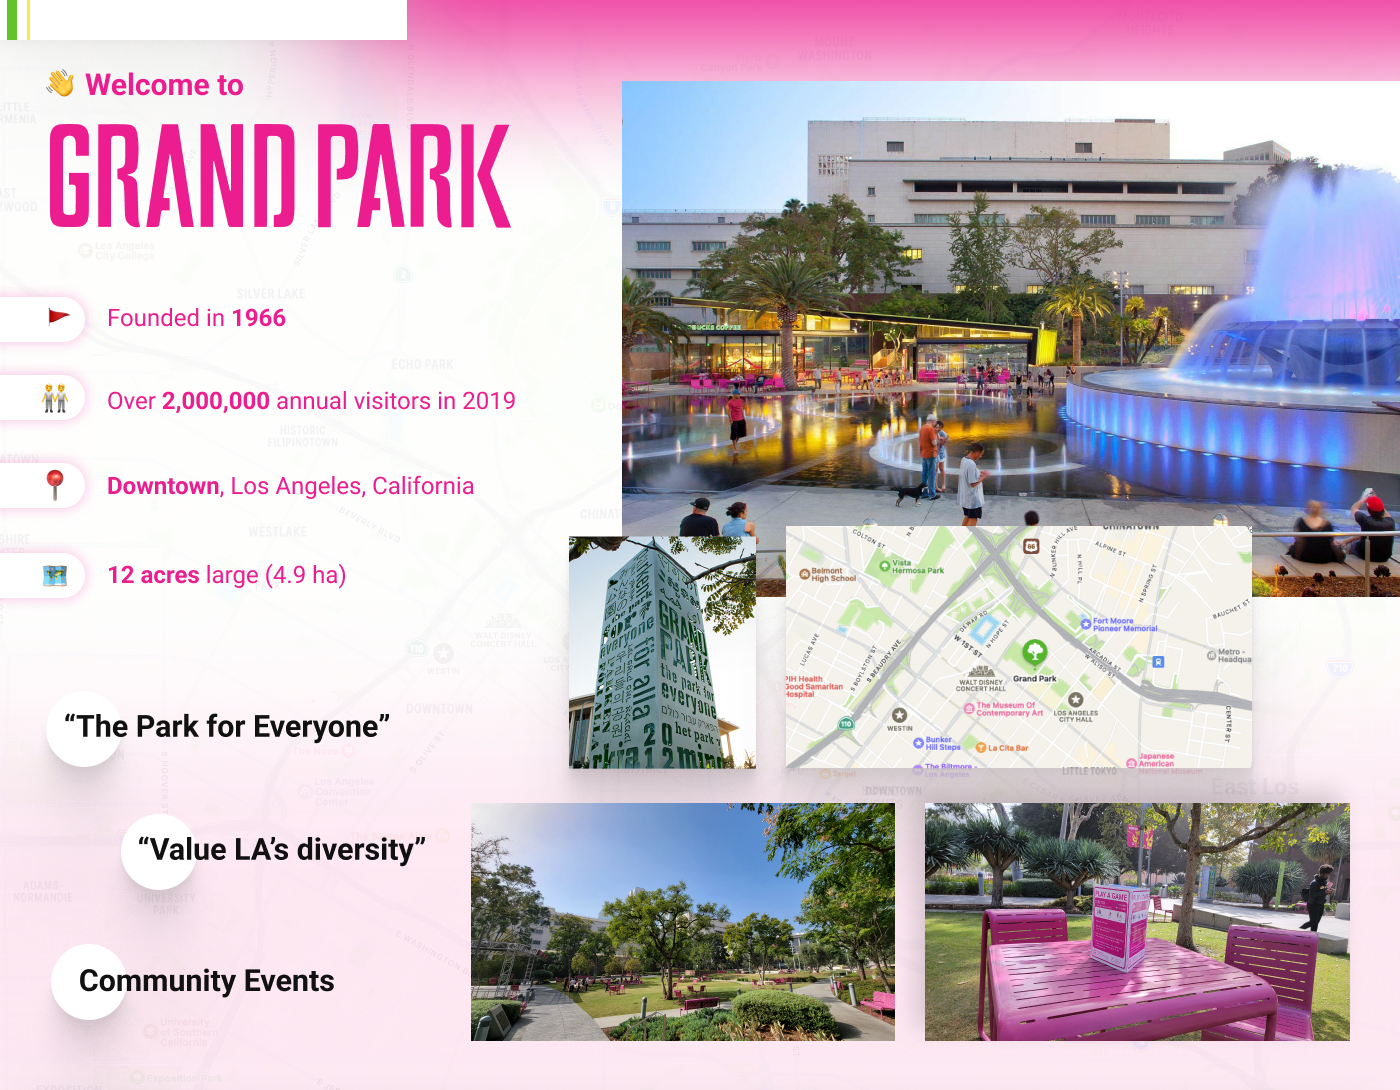 Welcome to Grand Park